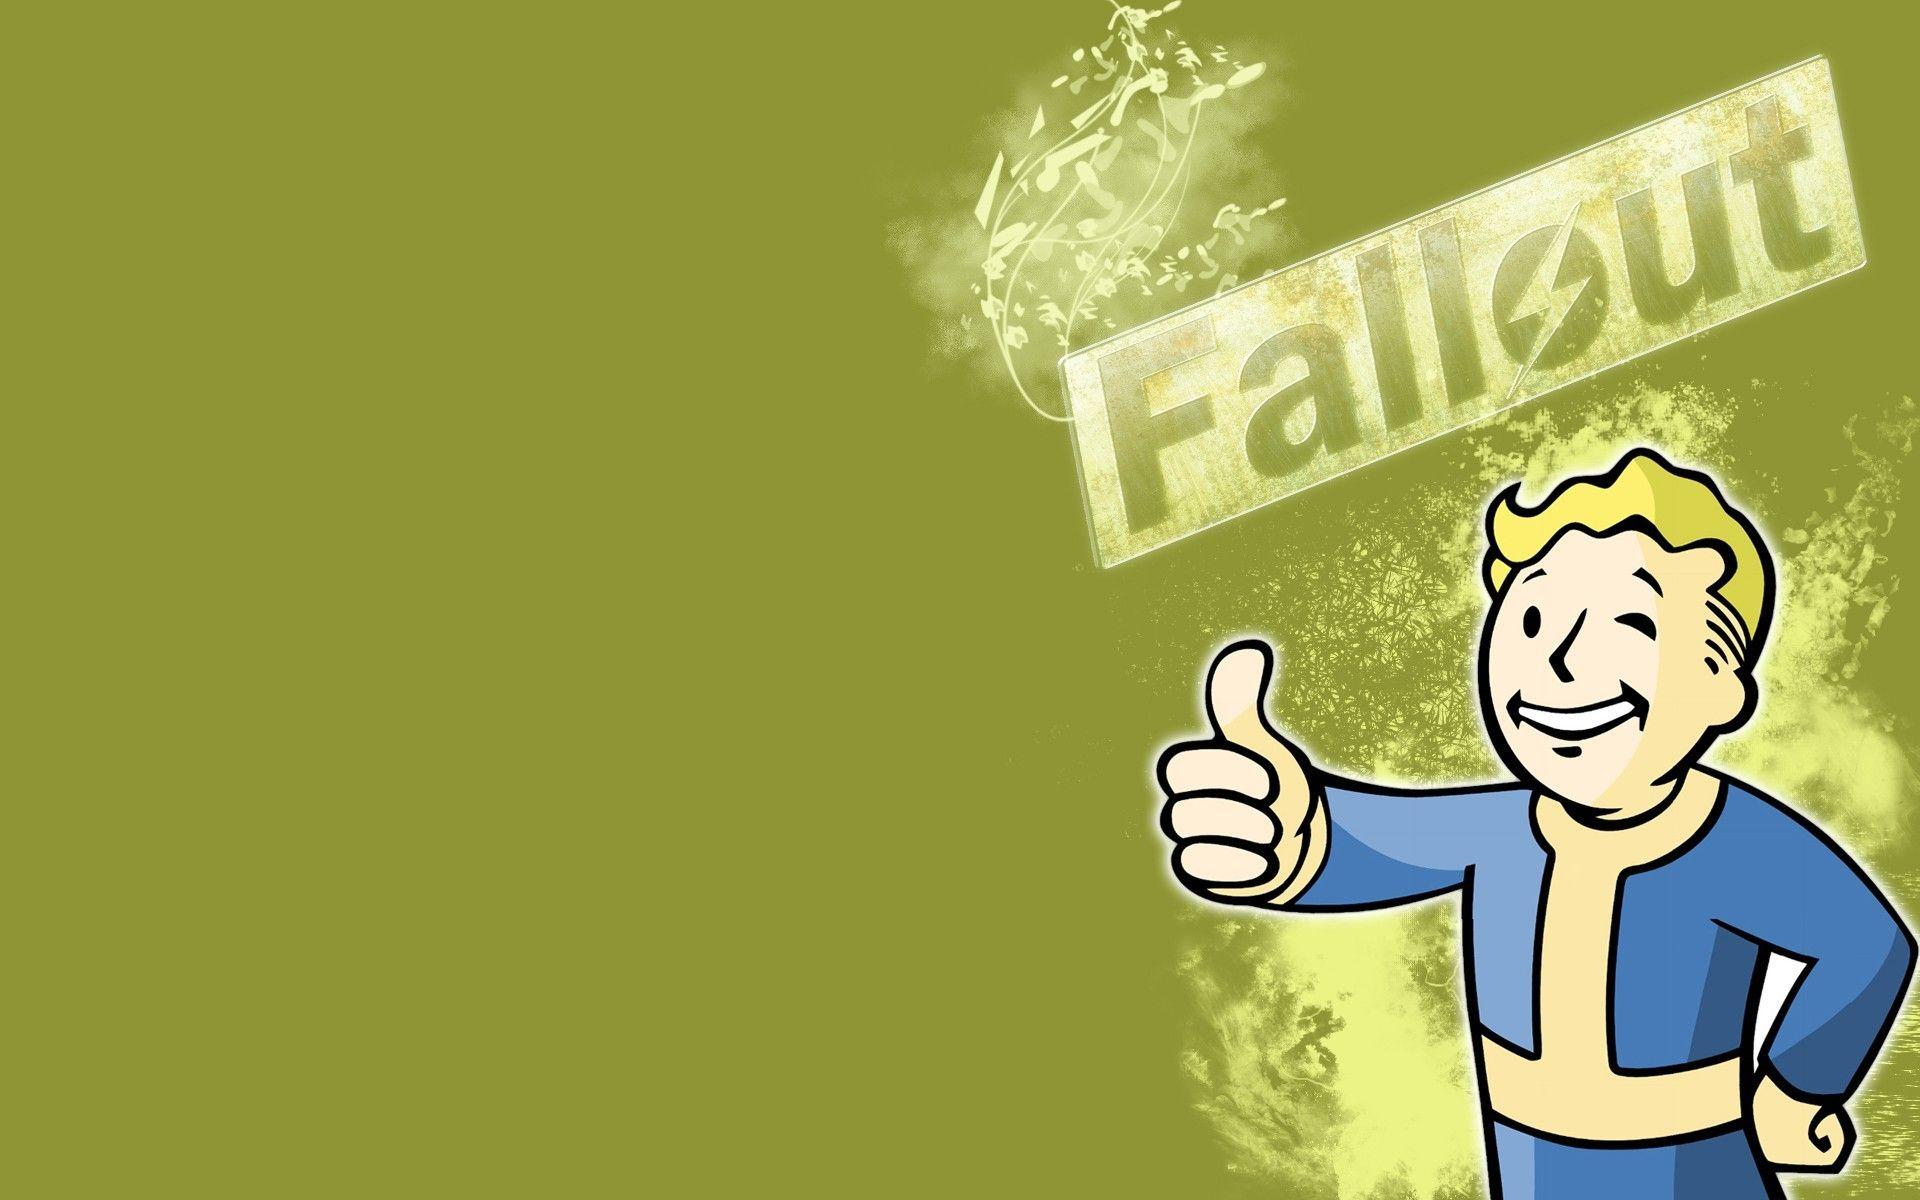 Gaming Daily: FALLOUT SHELTER Now Available on Android, Includes